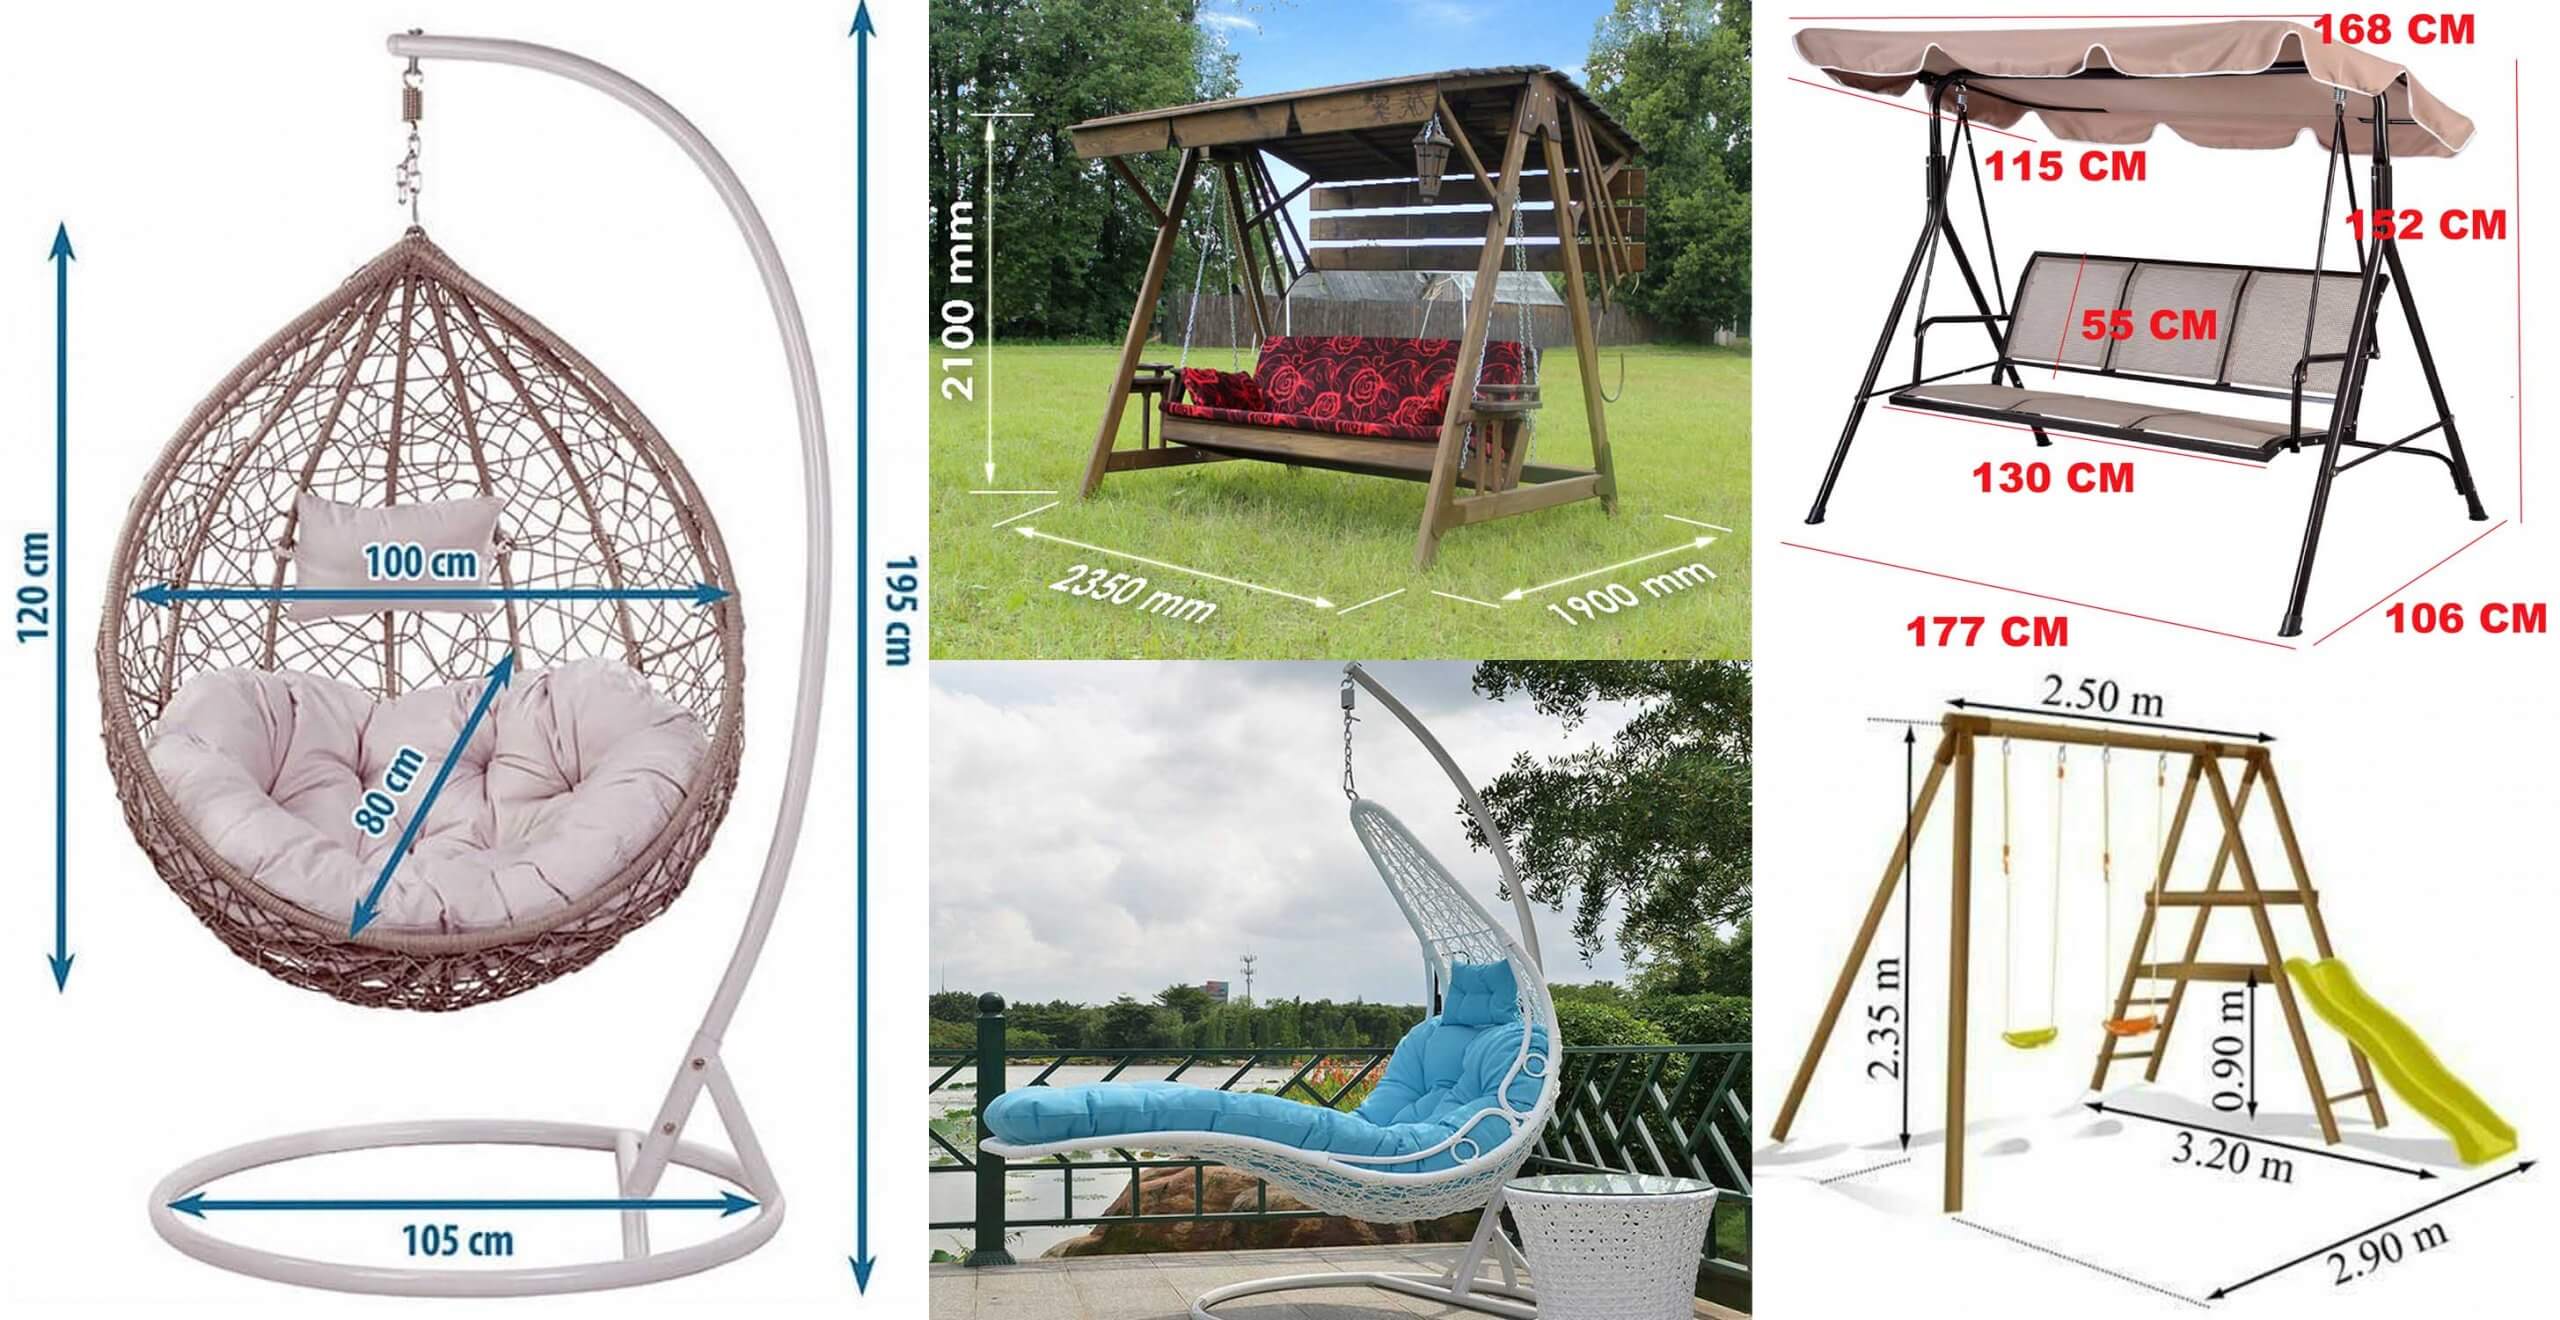 Standard Useful Swing Seat Dimensions - Engineering Discoveries